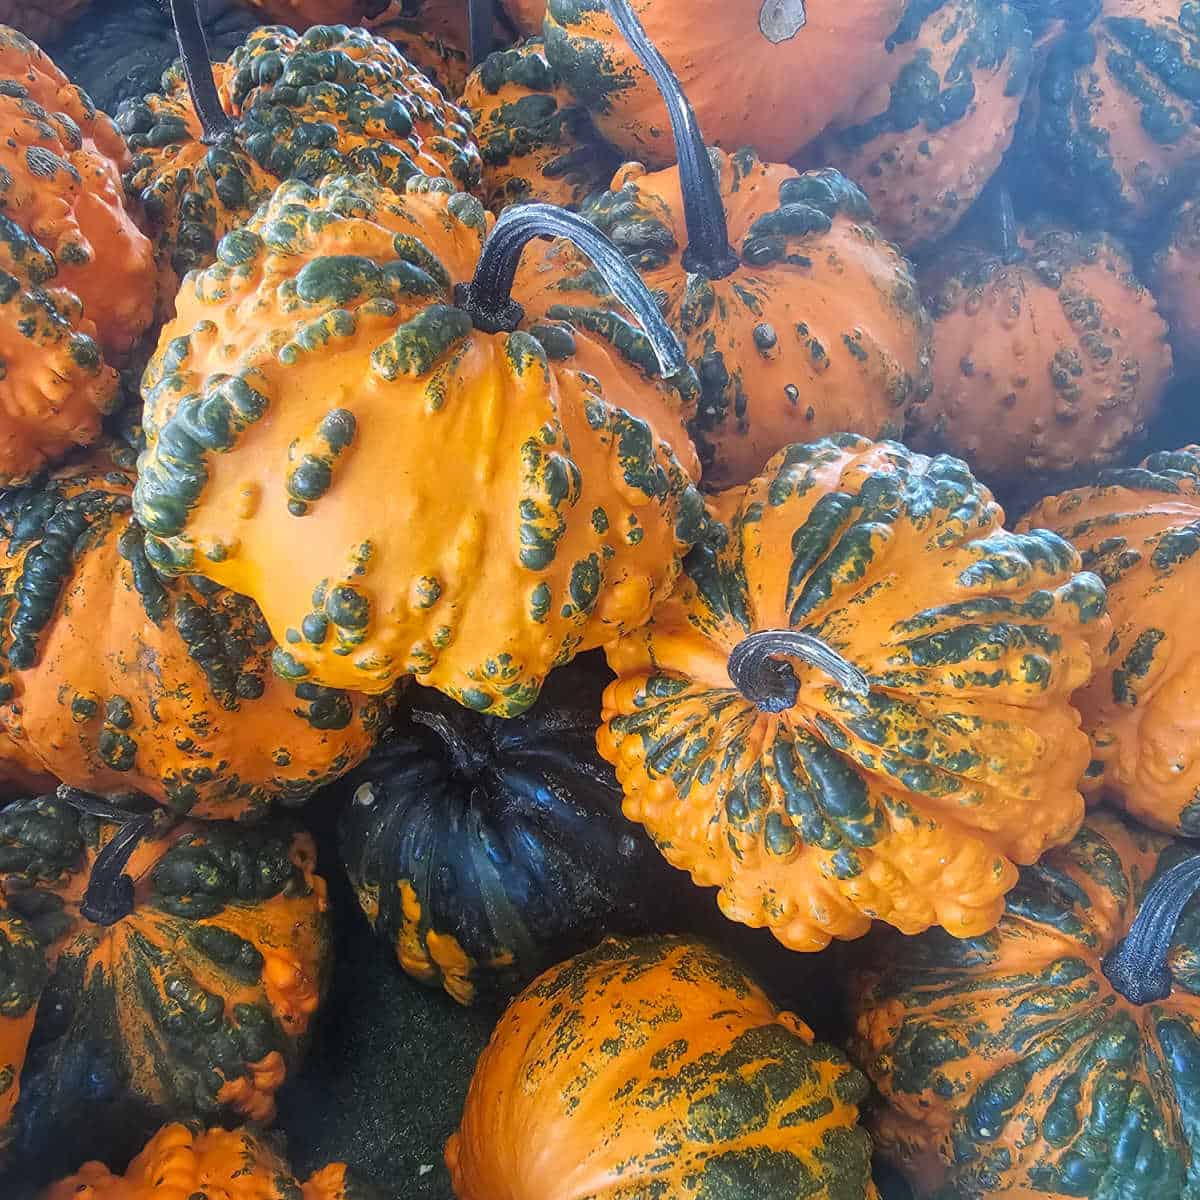 bumpy pumpkins stacked on top of each other